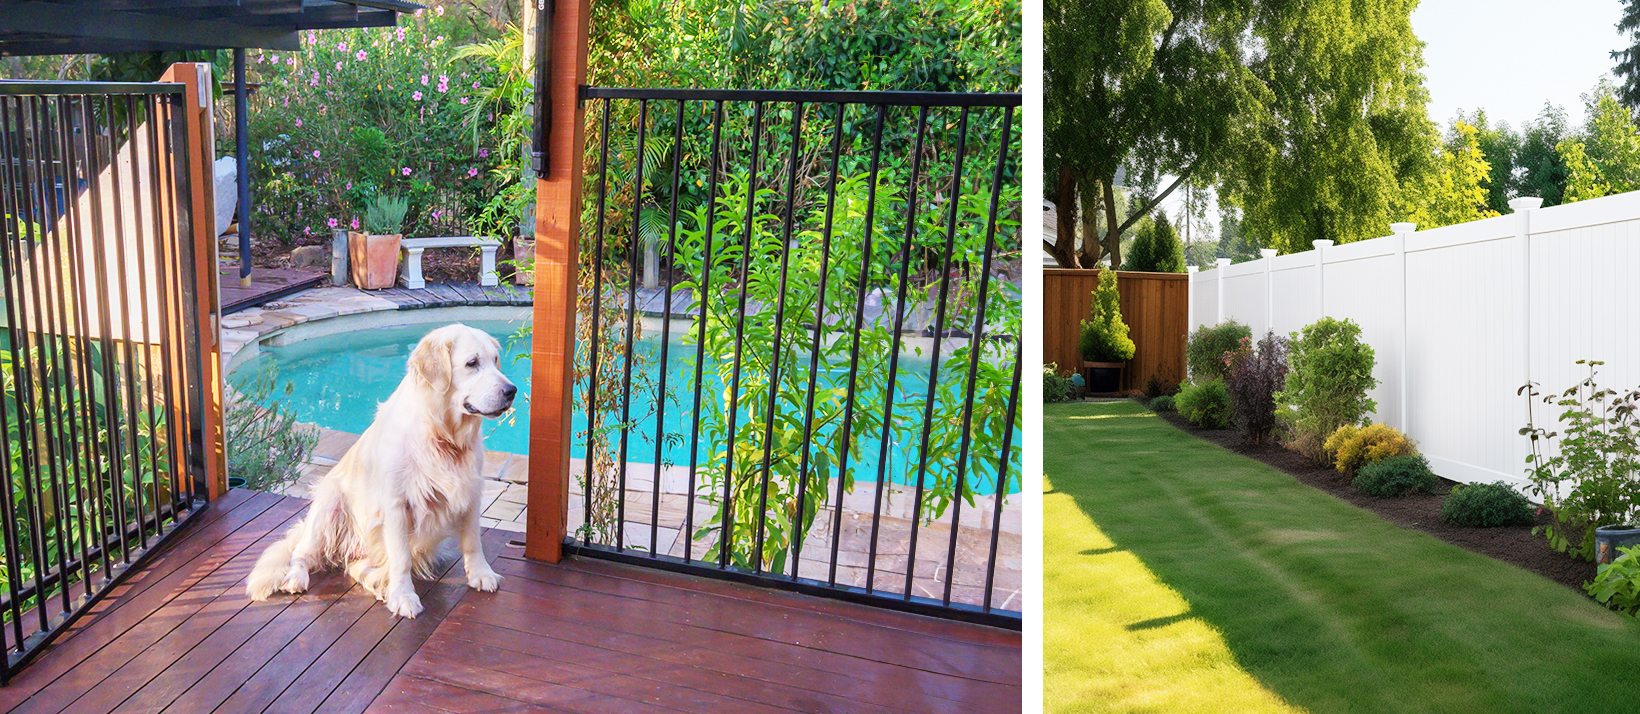 A split image showing a dog on a deck with a newer fence and pool in the background.